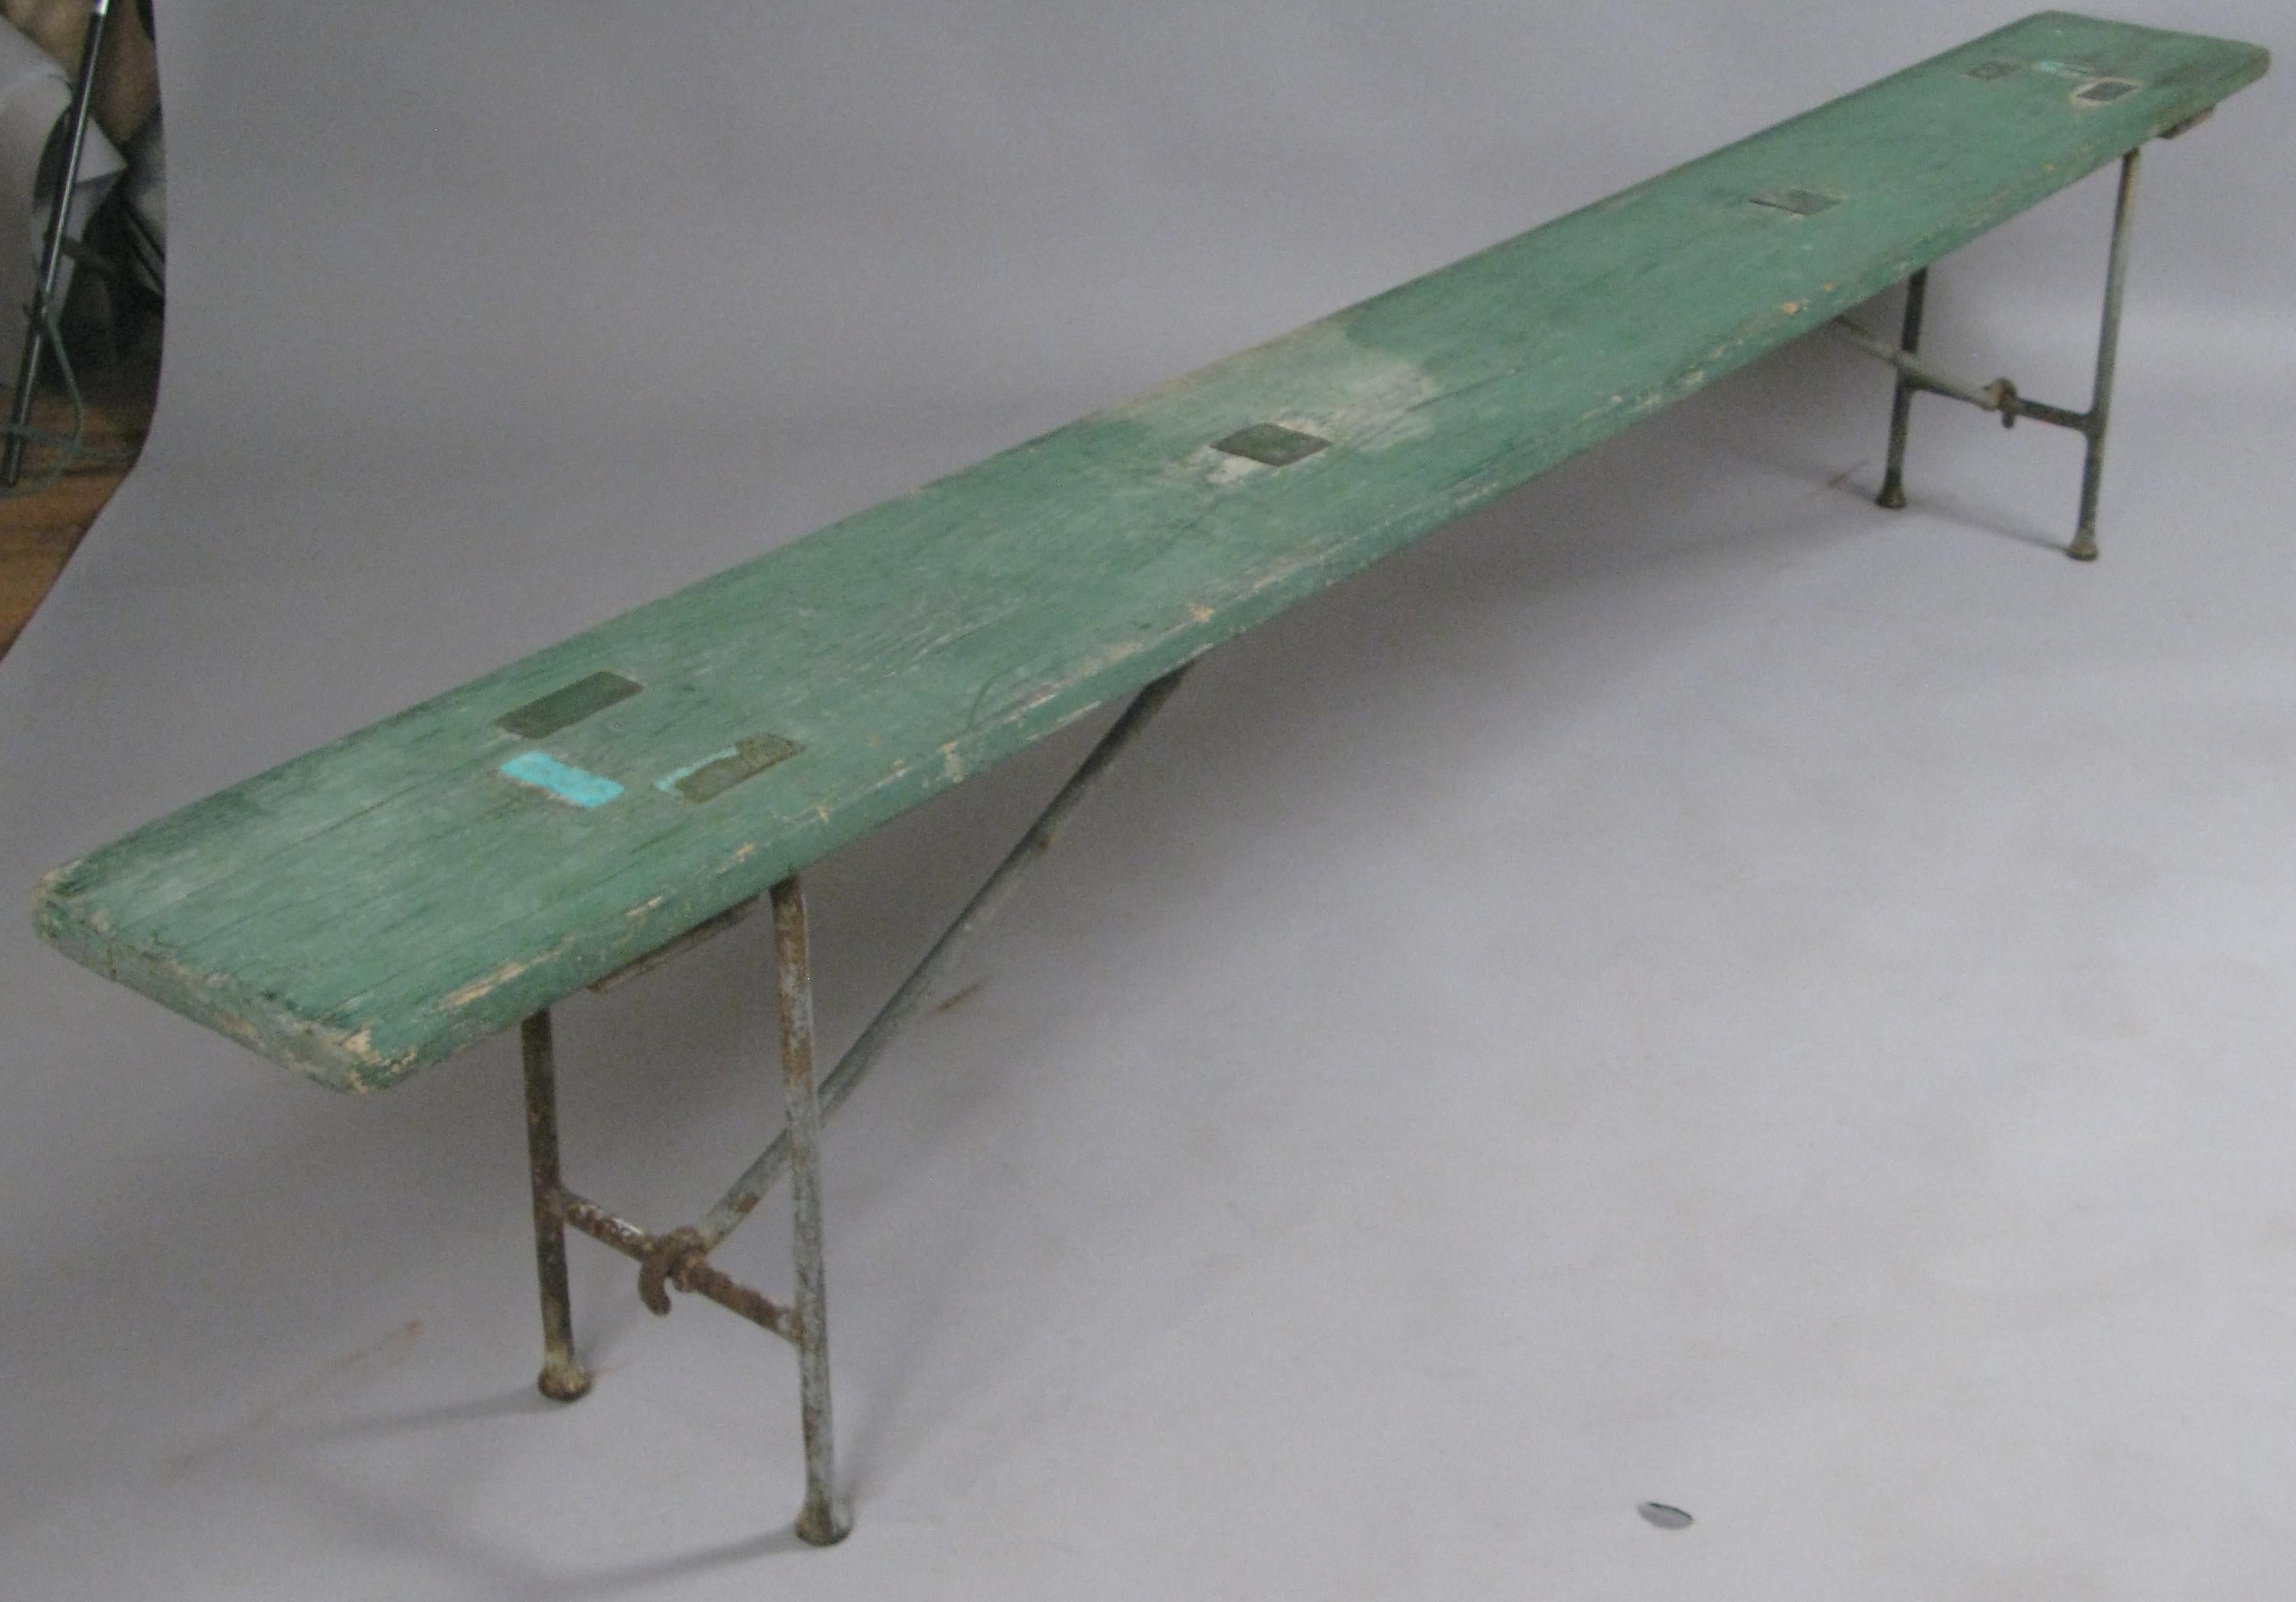 This rare pair of Naval benches were used in the banquet rooms on aircraft carriers in the 1930s. This pair has their original aged green painted finish on the pine benches. Unique design with exposed brass fitting panels on the top. Iron legs fold